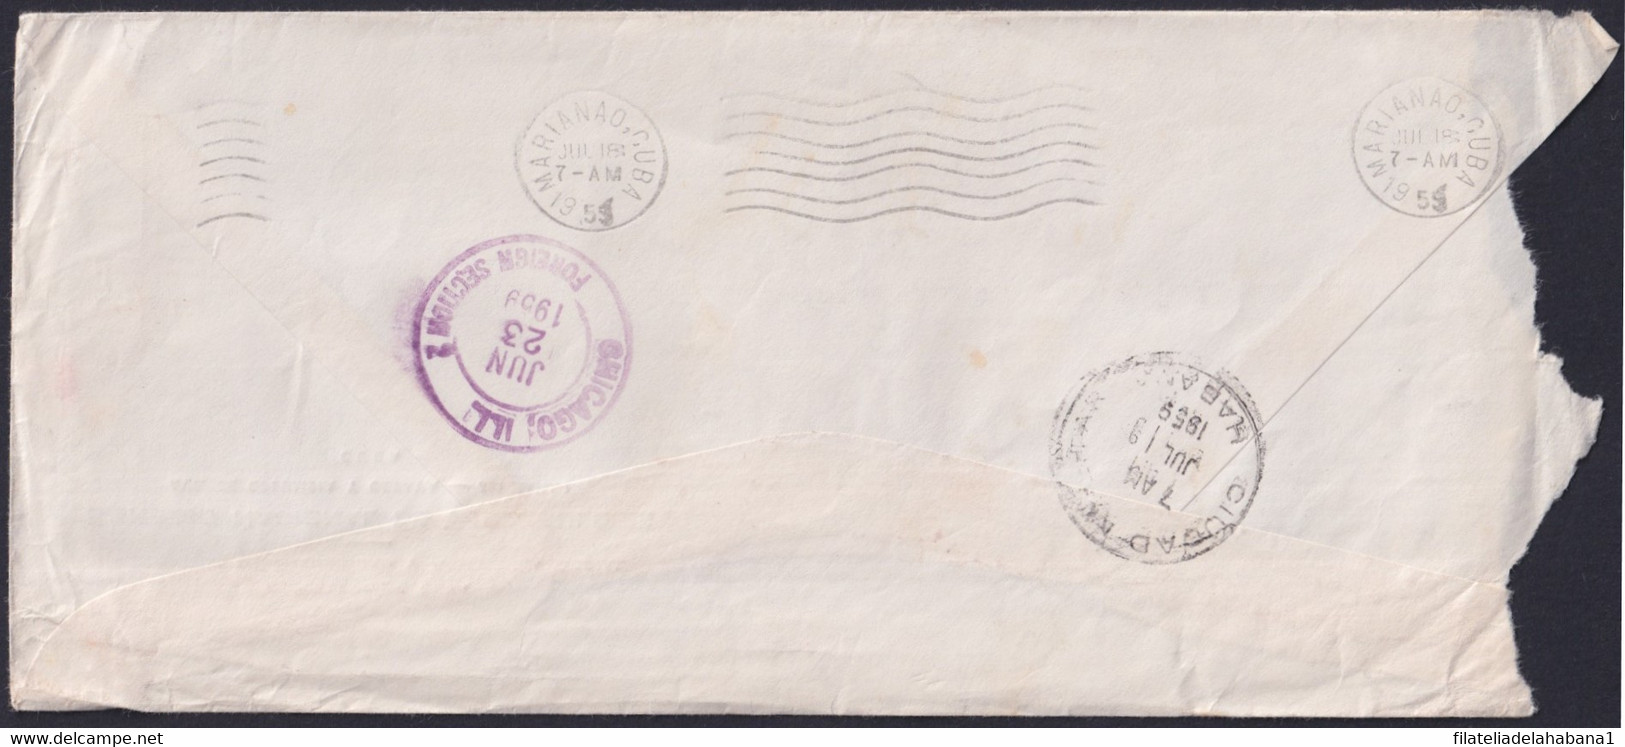 1959-H-39 CUBA 1959 LG-2158 OFFICIAL COVER POSTMARK FORWARDED COVER TO USA. - Covers & Documents